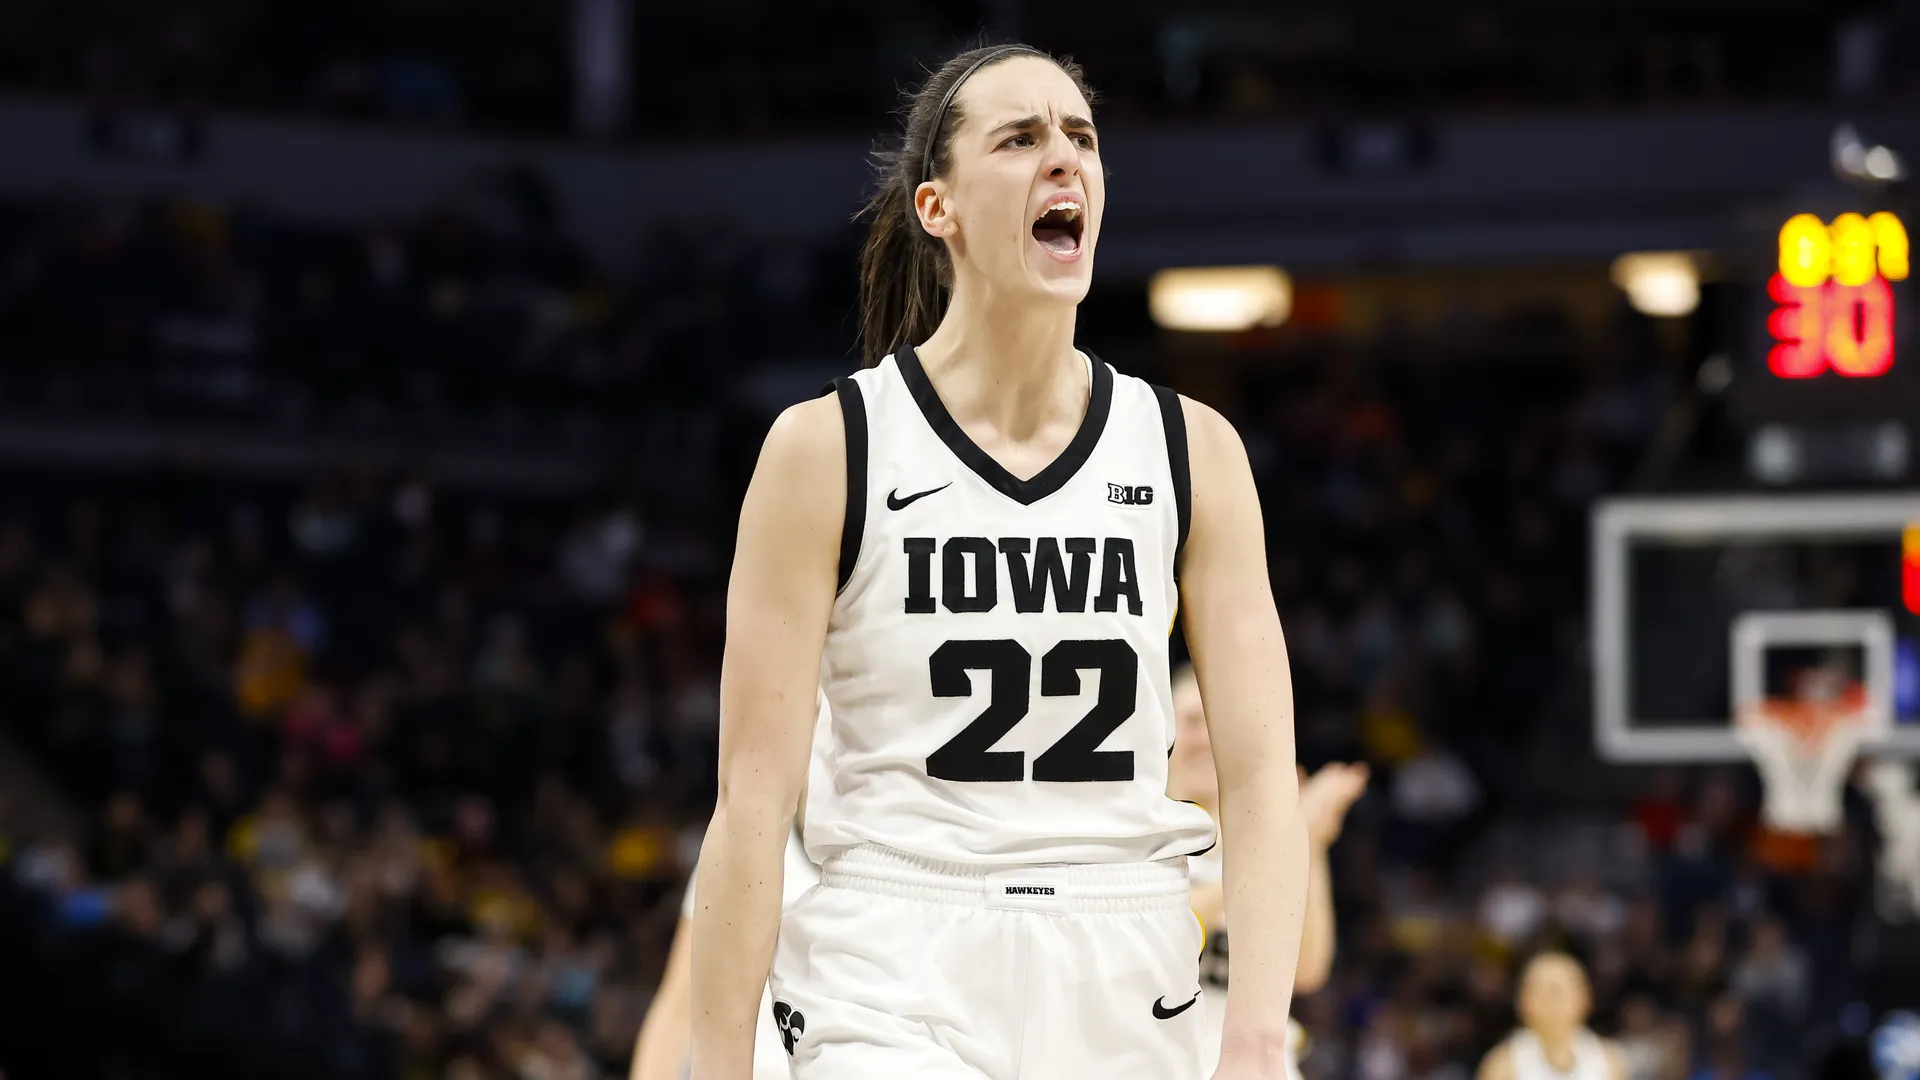 NBA News: How Much Will Caitlin Clark's Earnings Drop in the WNBA? Iowa ...